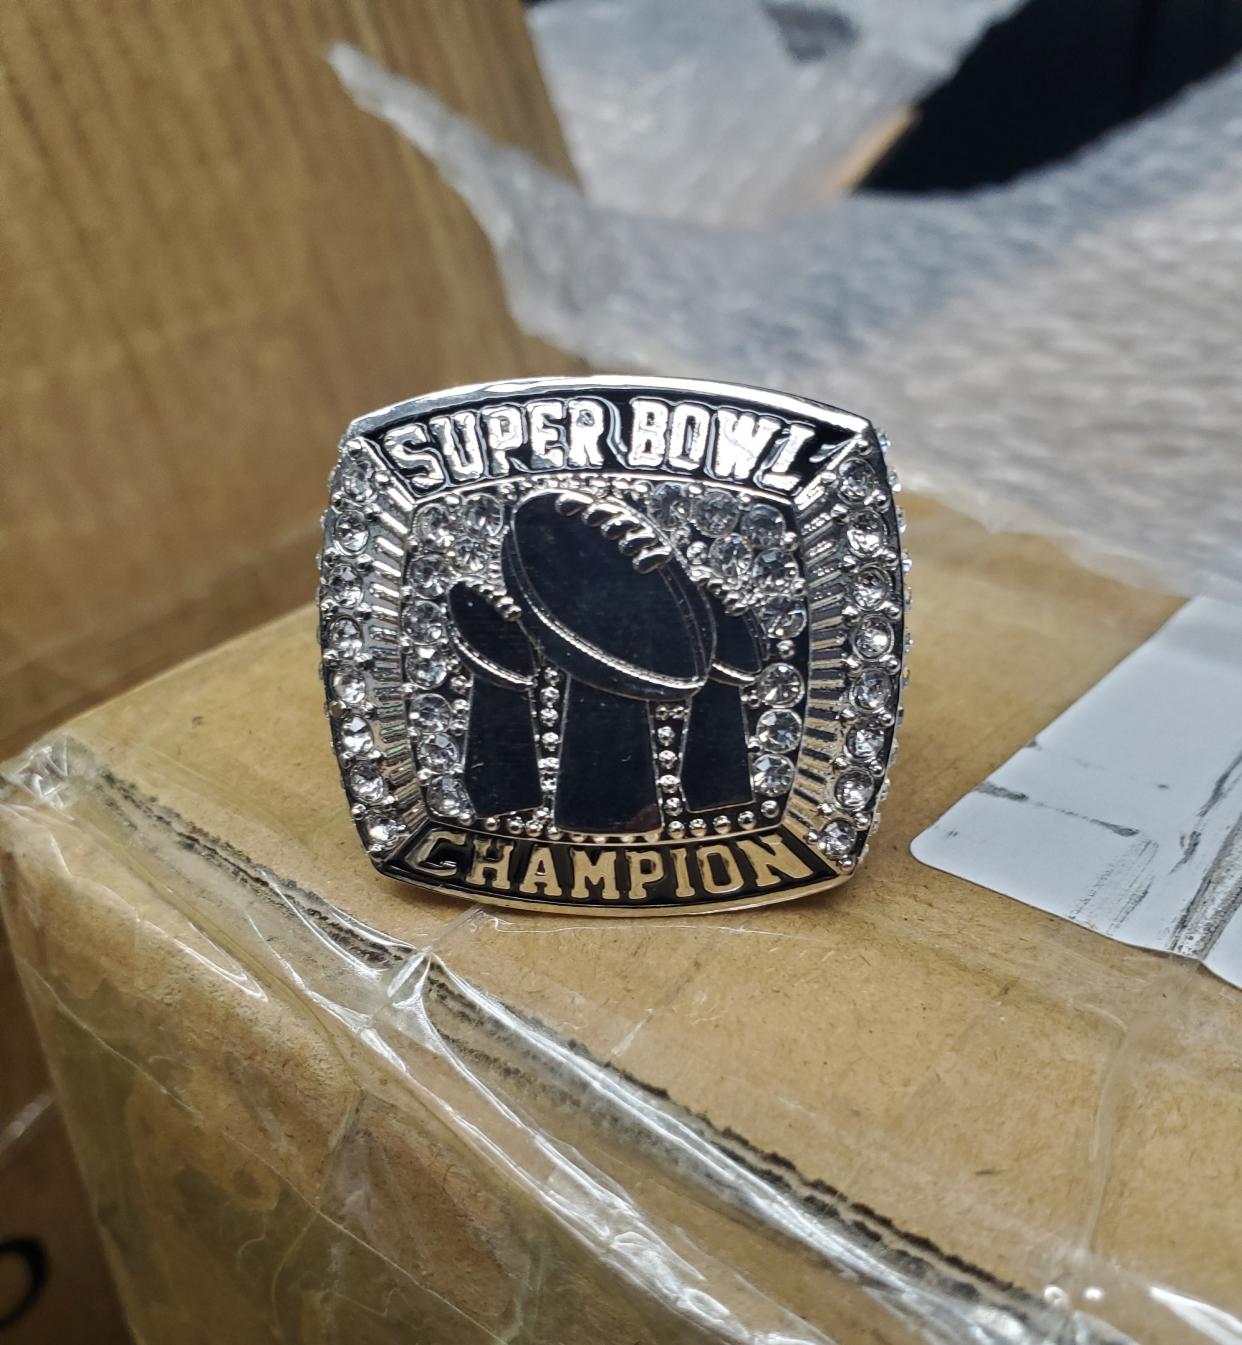 One of the fraudulent Super Bowl rings seized.